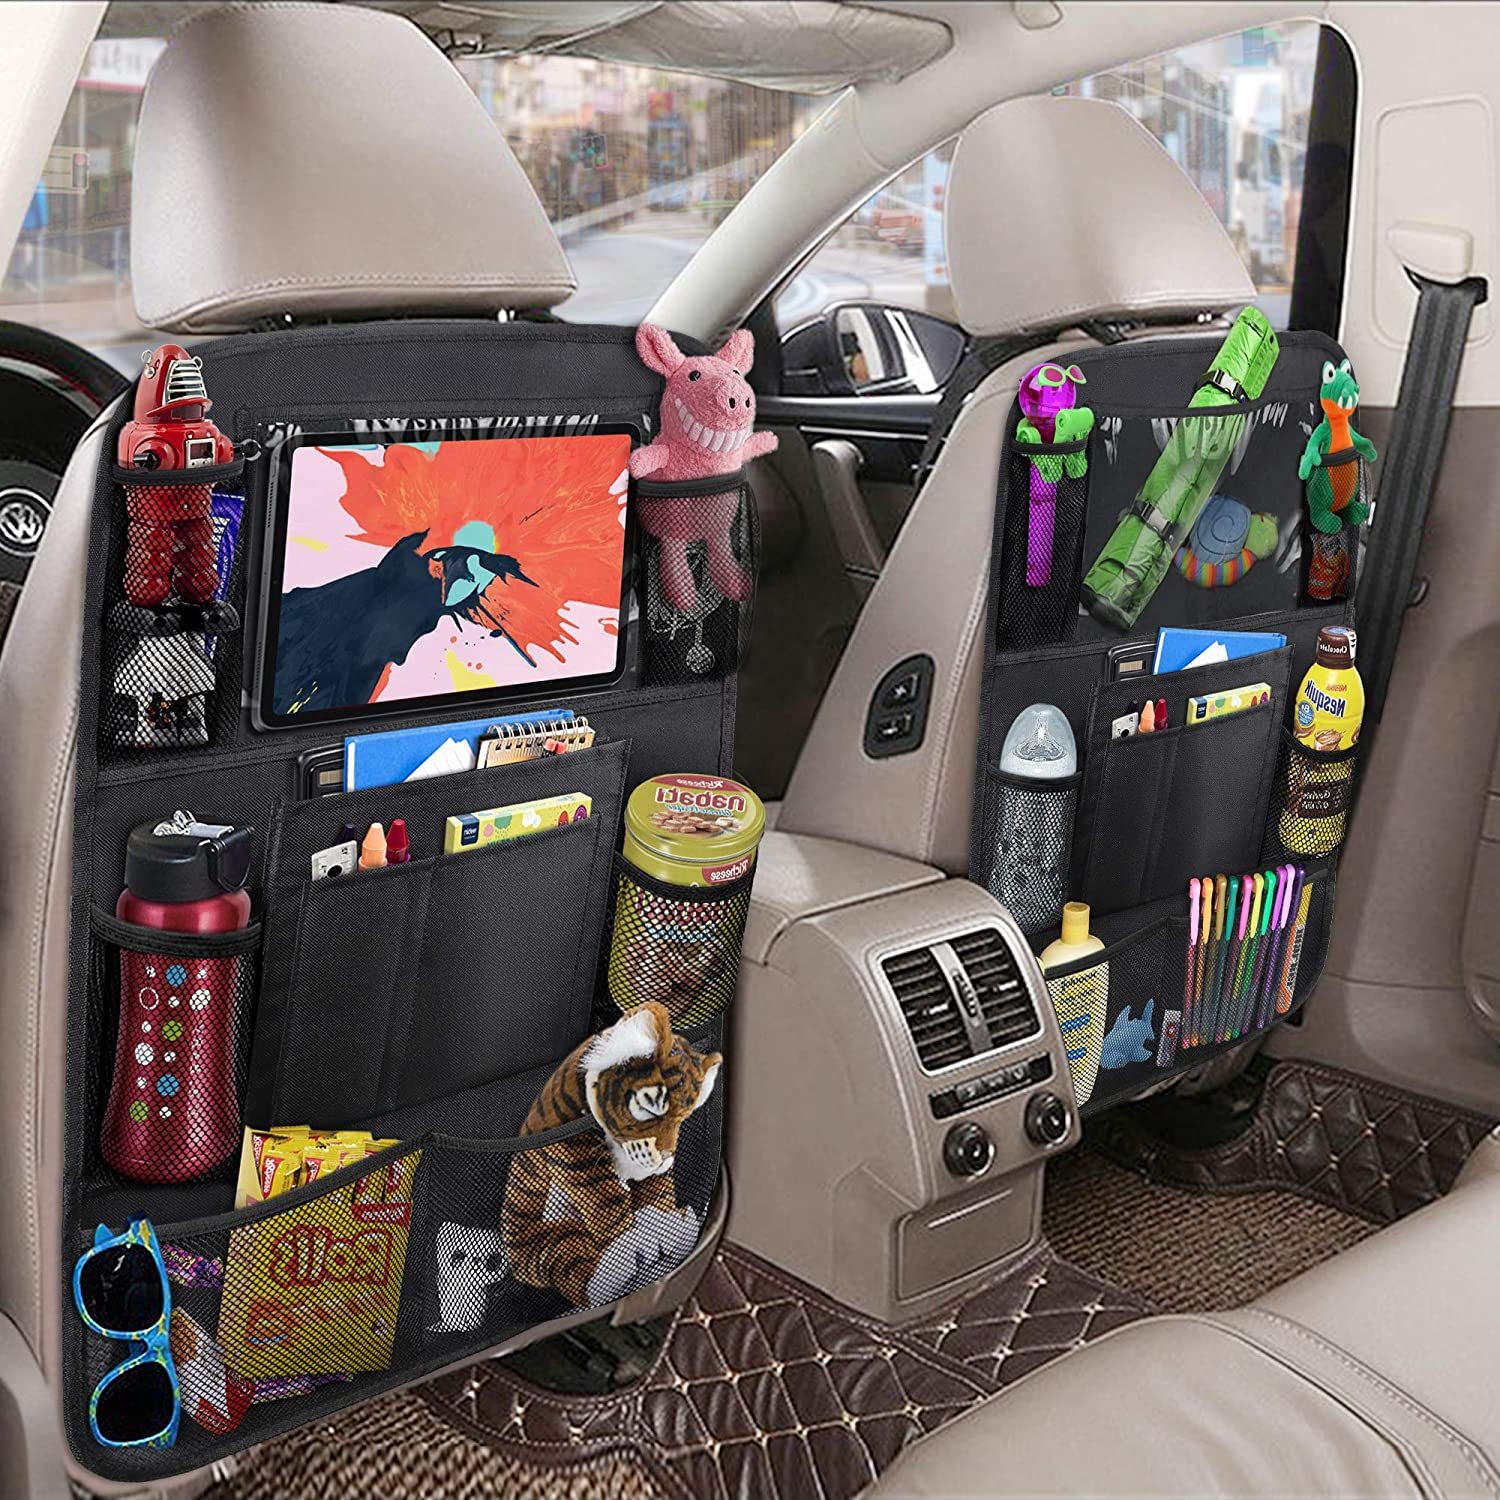 10 Weird Car Accessories You Didn't Know You Needed